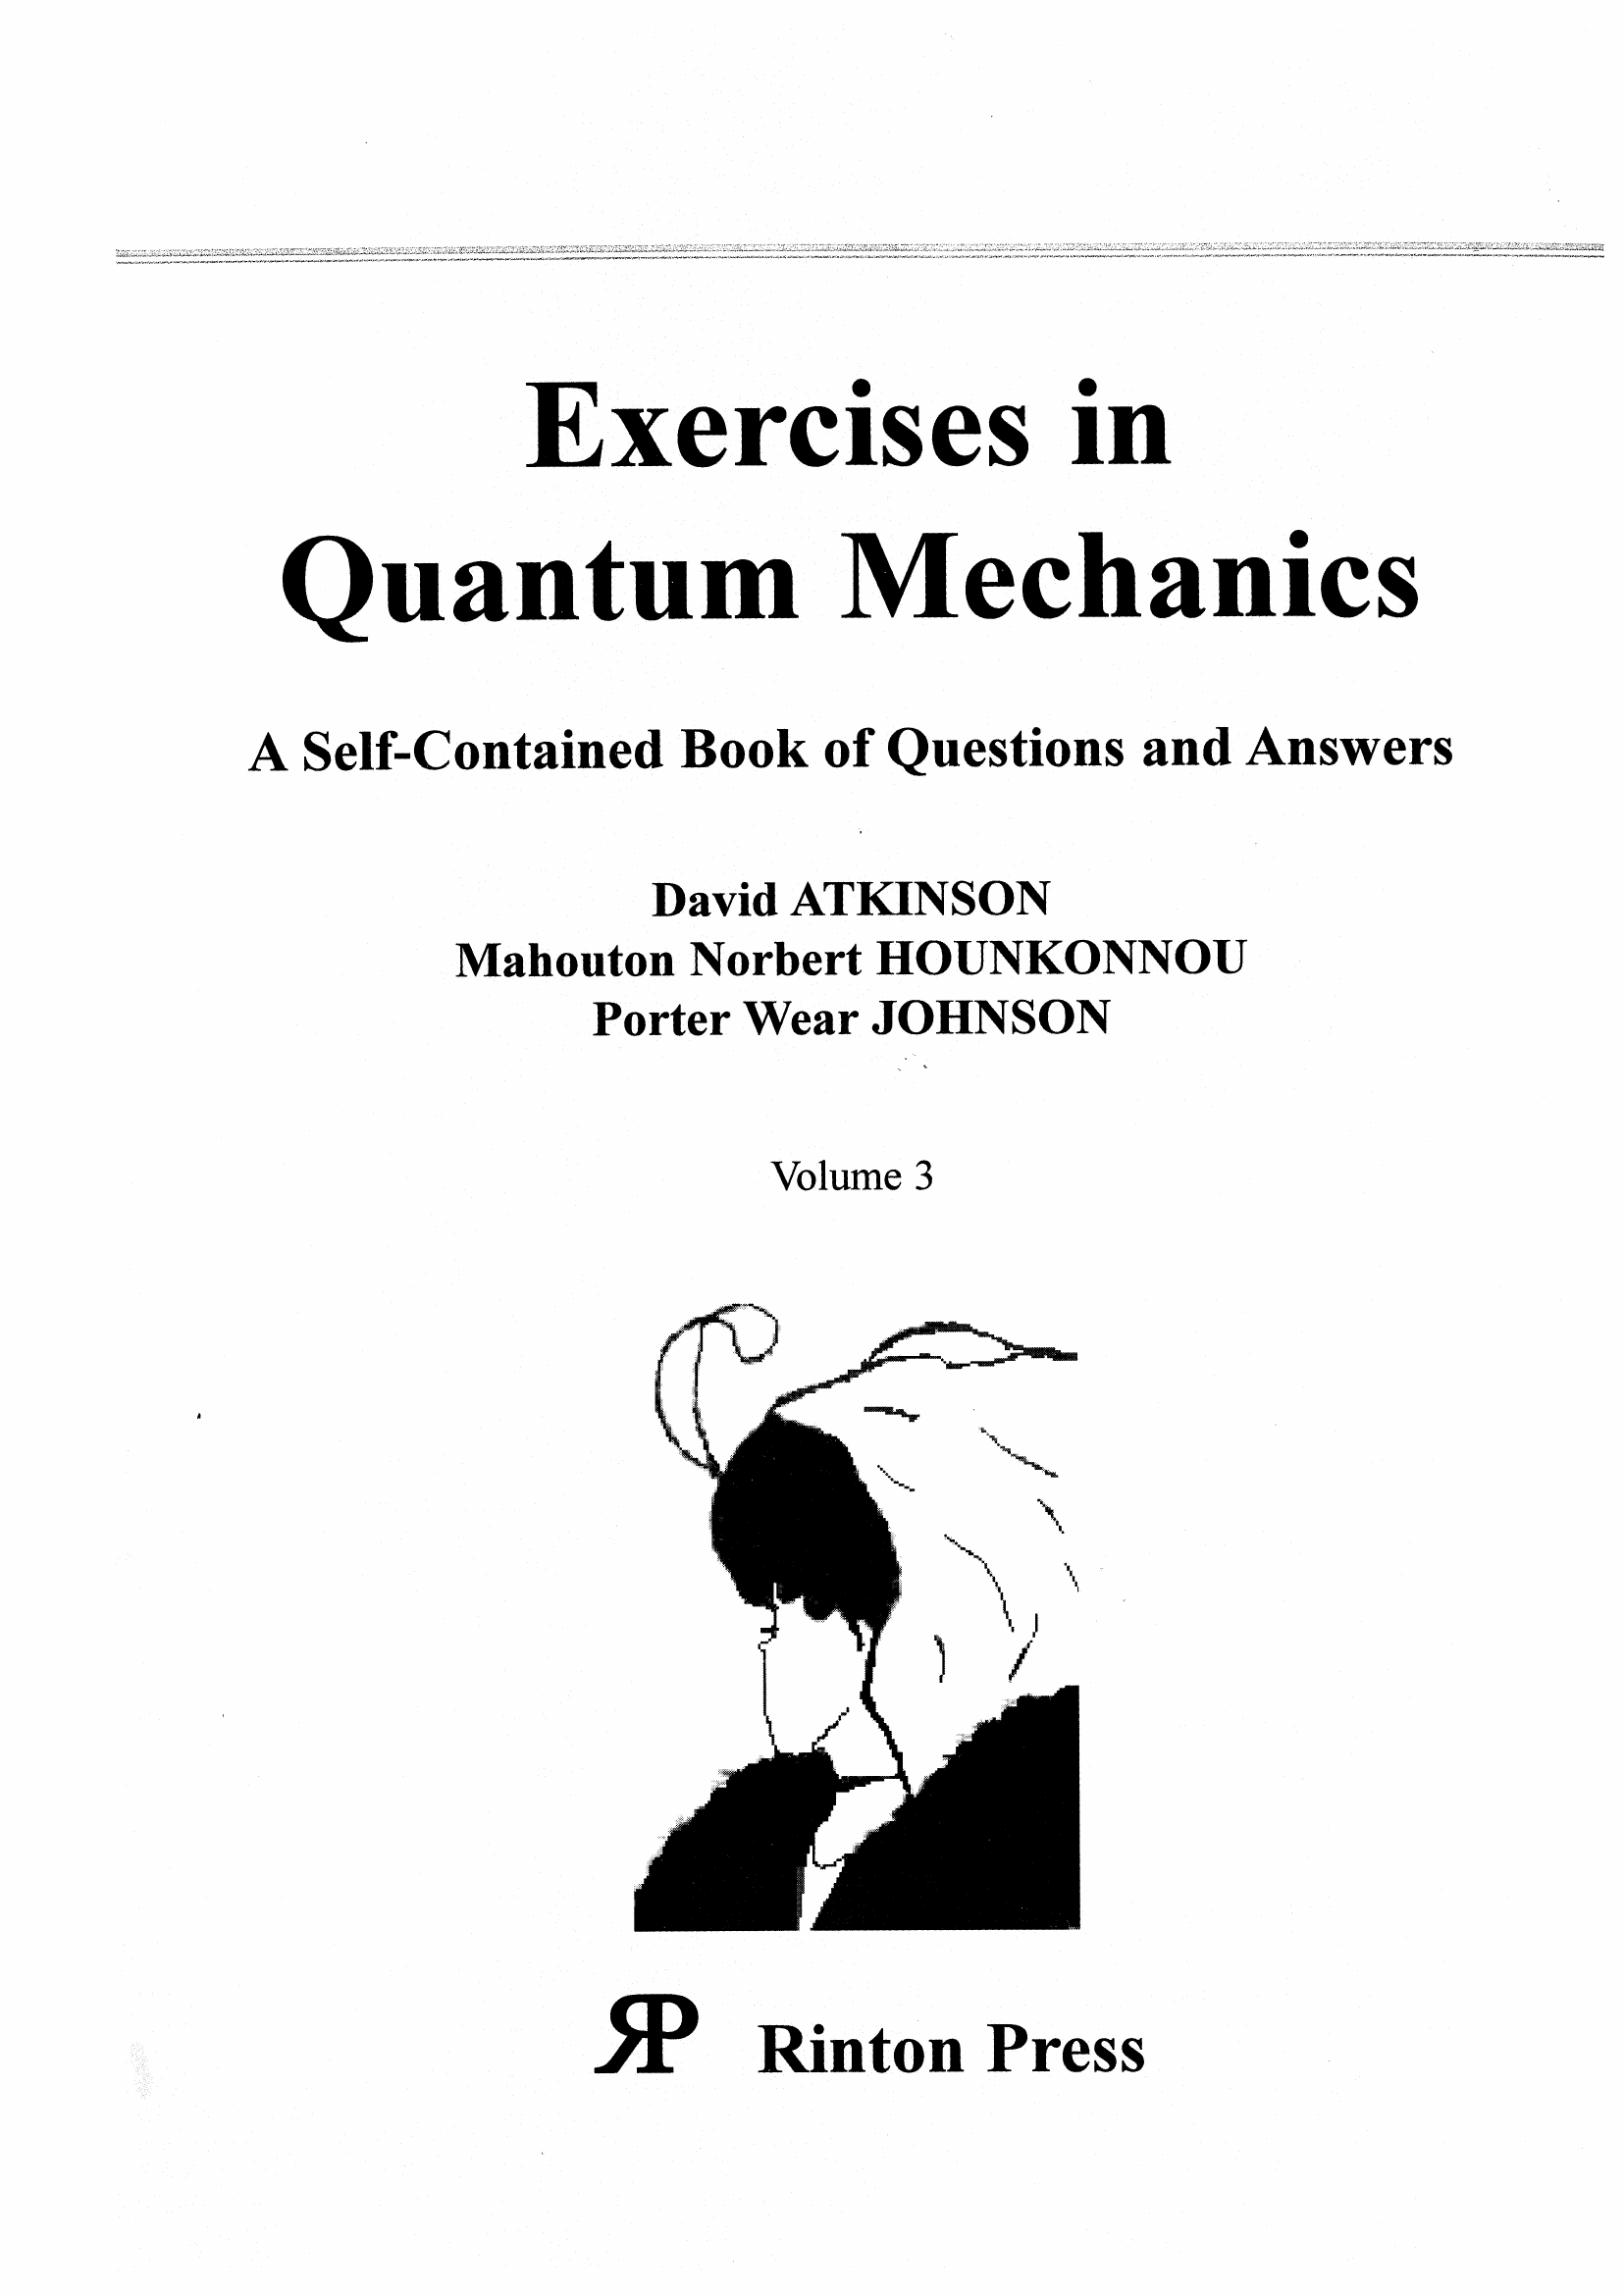 David Atkinson, Mahouton Norbert Hounkonnou, Porter Wear Johnson - Exercises in Quantum Mechanics_ A Self-Contained Book of Questions and Answers-Rinton Press (2003).pdf